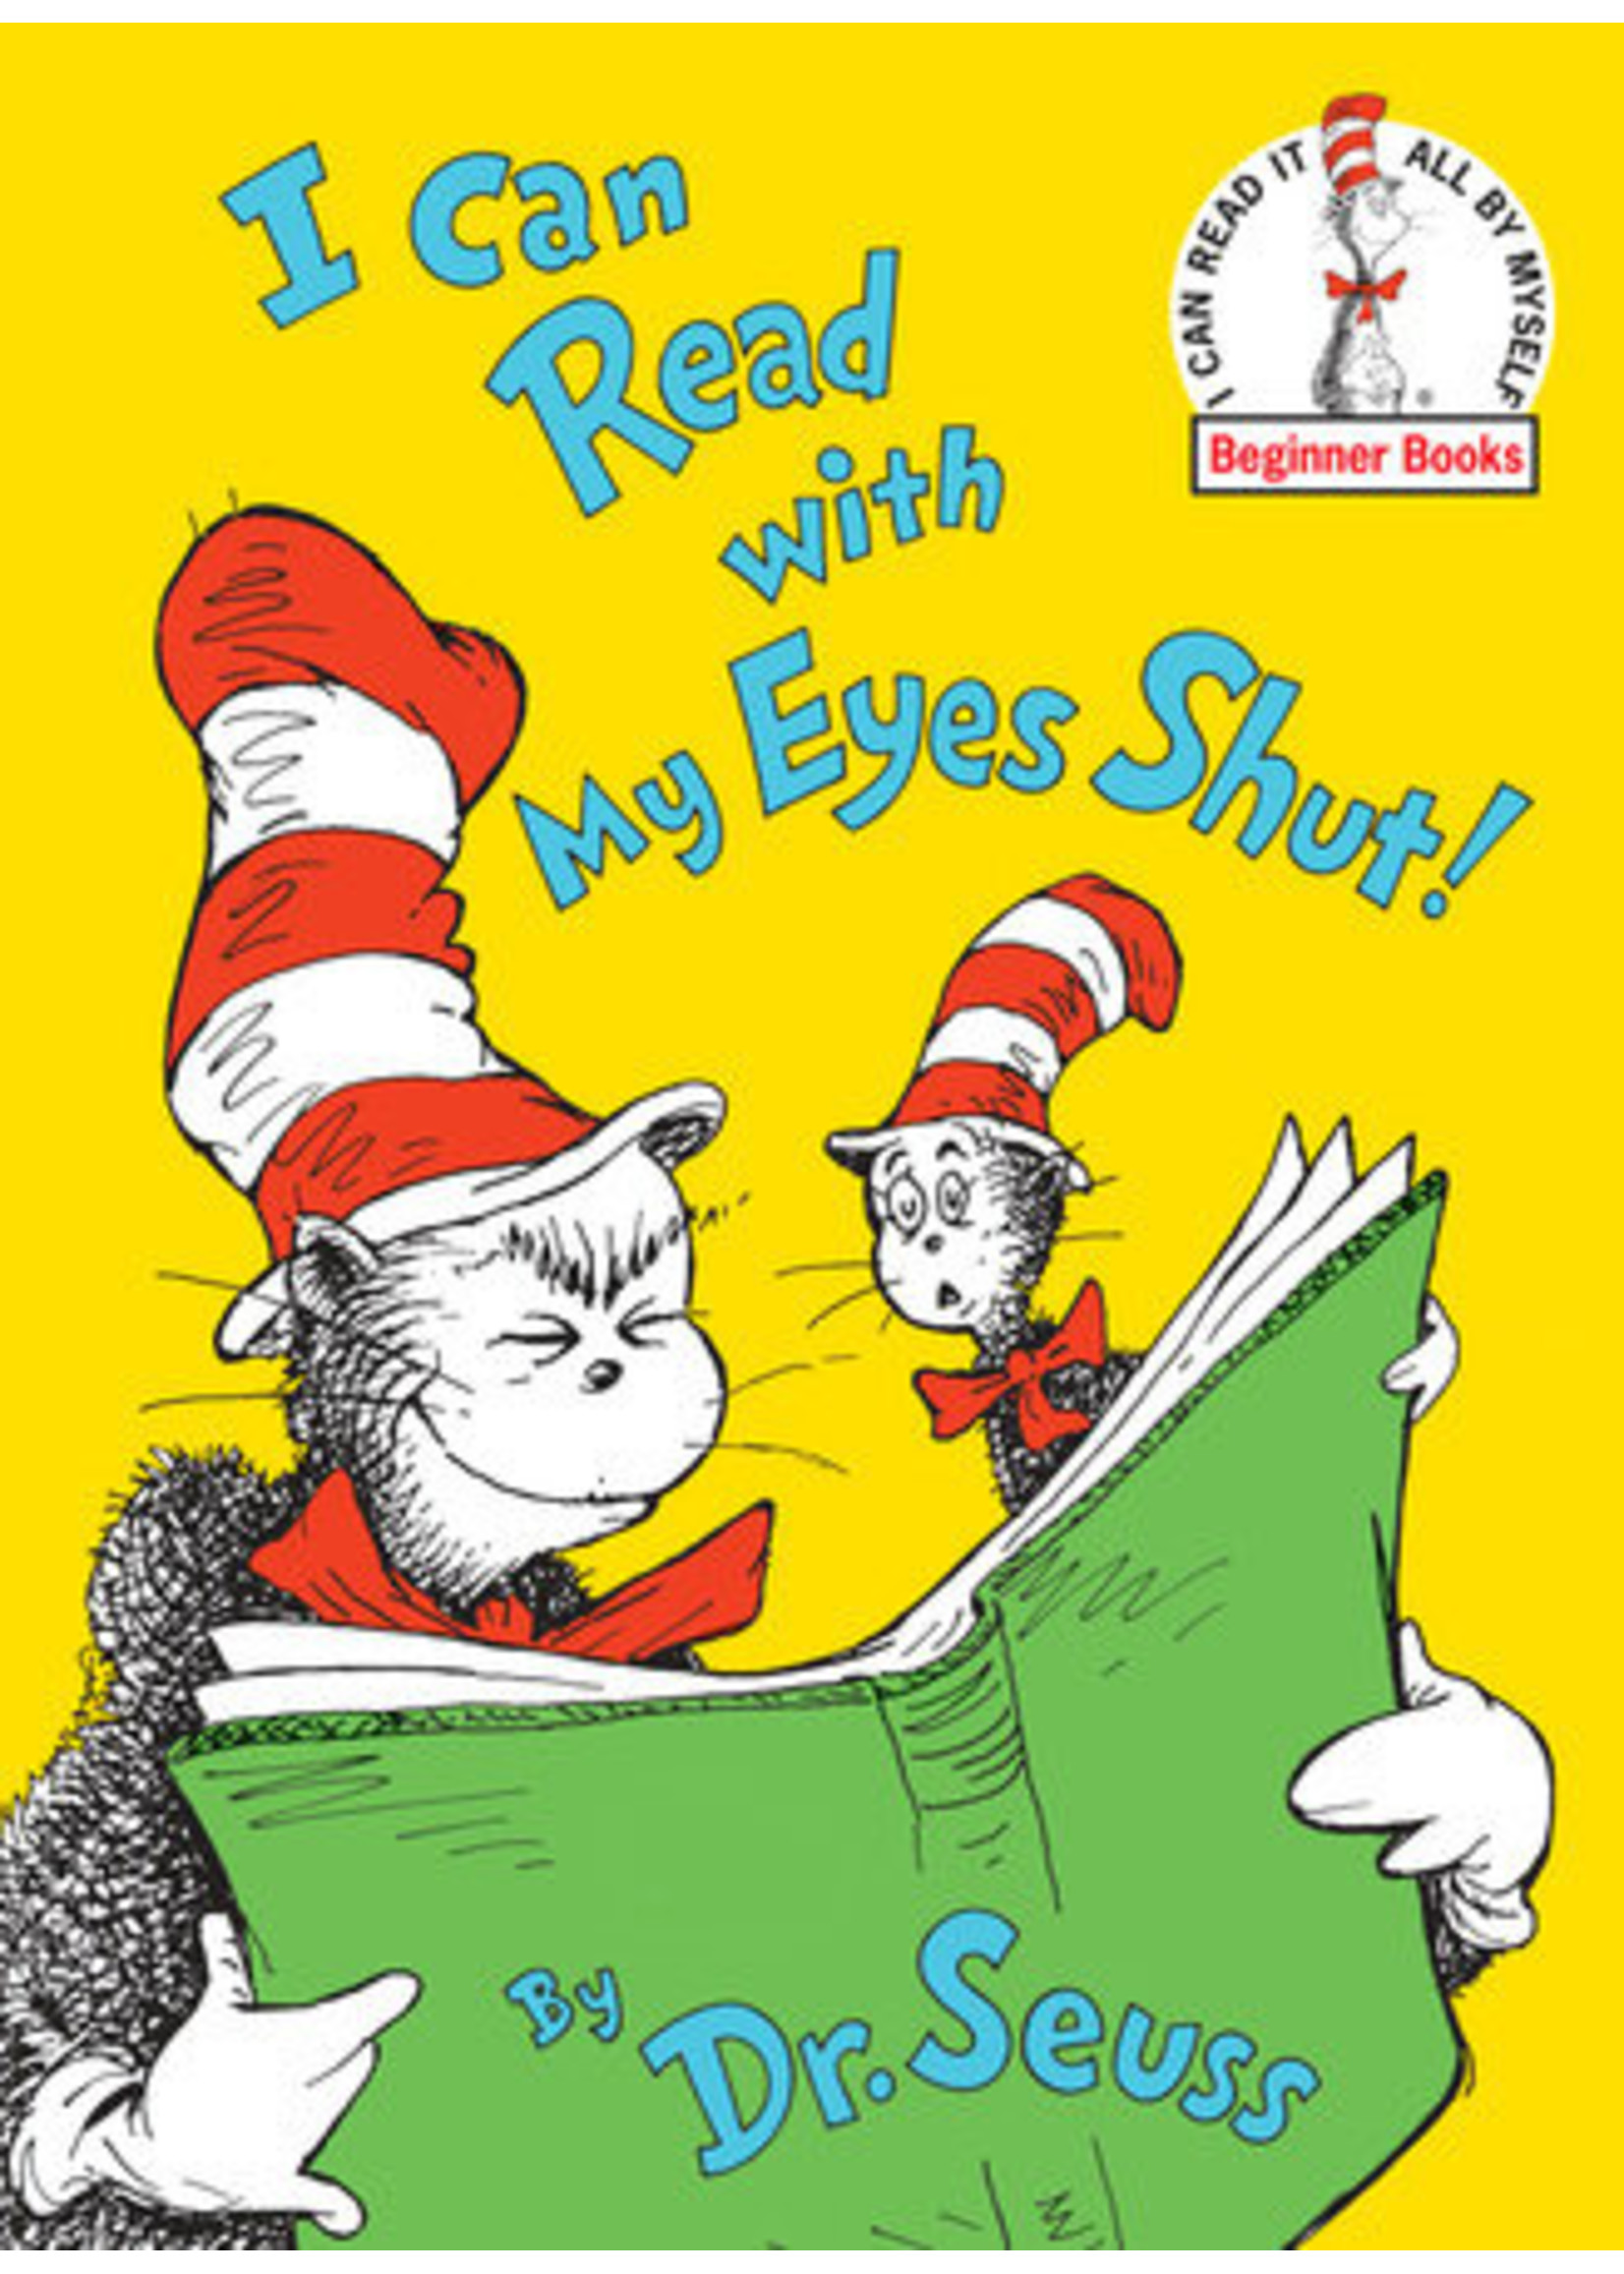 Penguin Dr. Seuss - I Can Read with My Eyes Shut